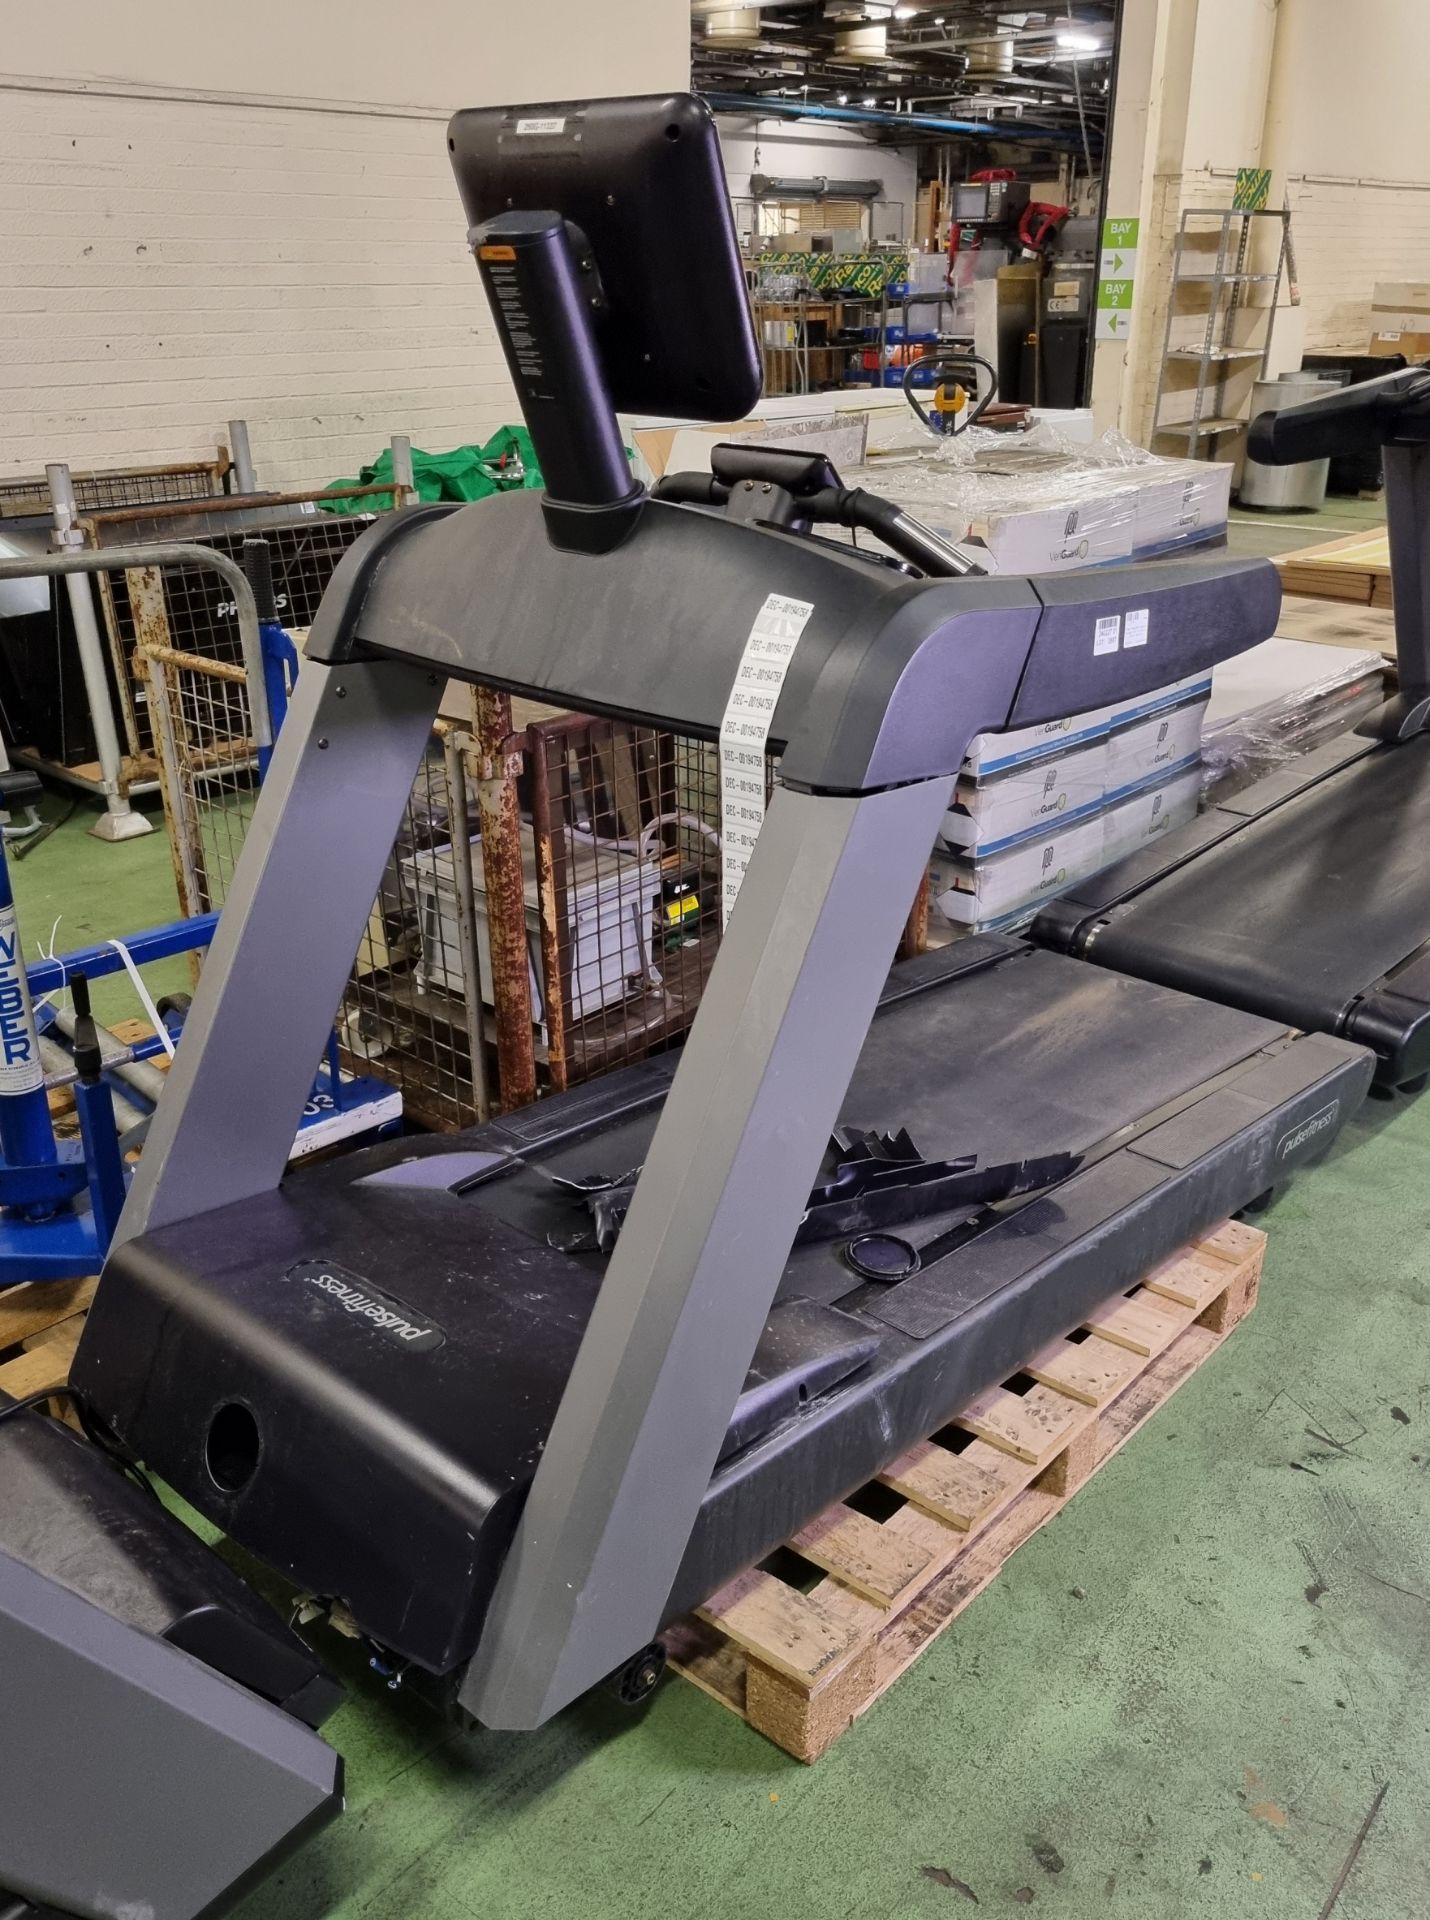 Pulse Fitness 260G treadmill - damage to front - W 2120 x D 850 x H 1580 mm - Image 6 of 7